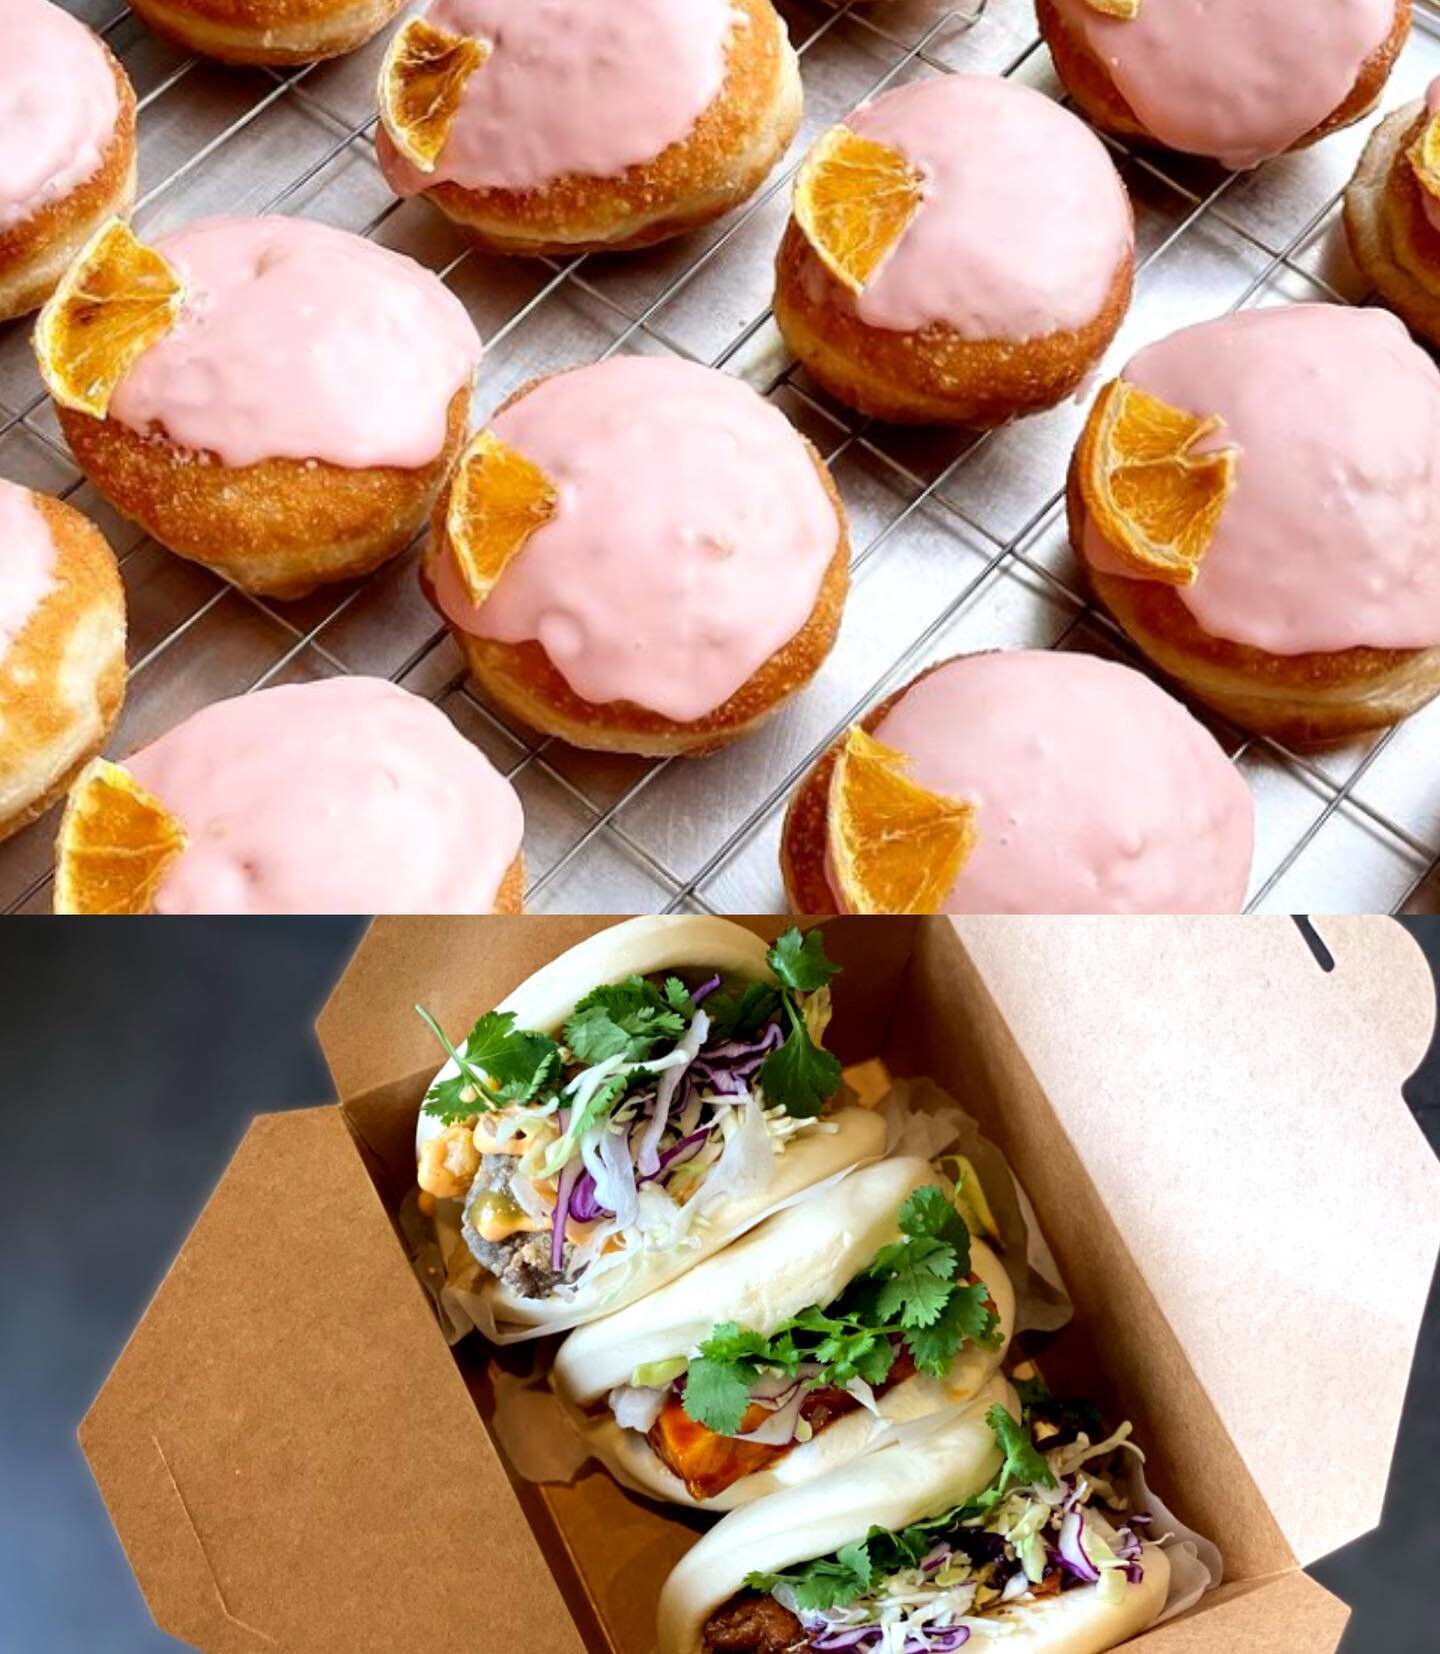 ⚡🍩⚡ GIVEAWAY! ⚡🍩⚡

Our favourite donuts from @platesbypayts are back again (this Friday only!!) and we're celebrating with a flash giveaway contest 🥳🥳

Enter to win: 
🍩 A box of 4 donuts from PlatesbyPayts (flavours: strawberry cheesecake, match